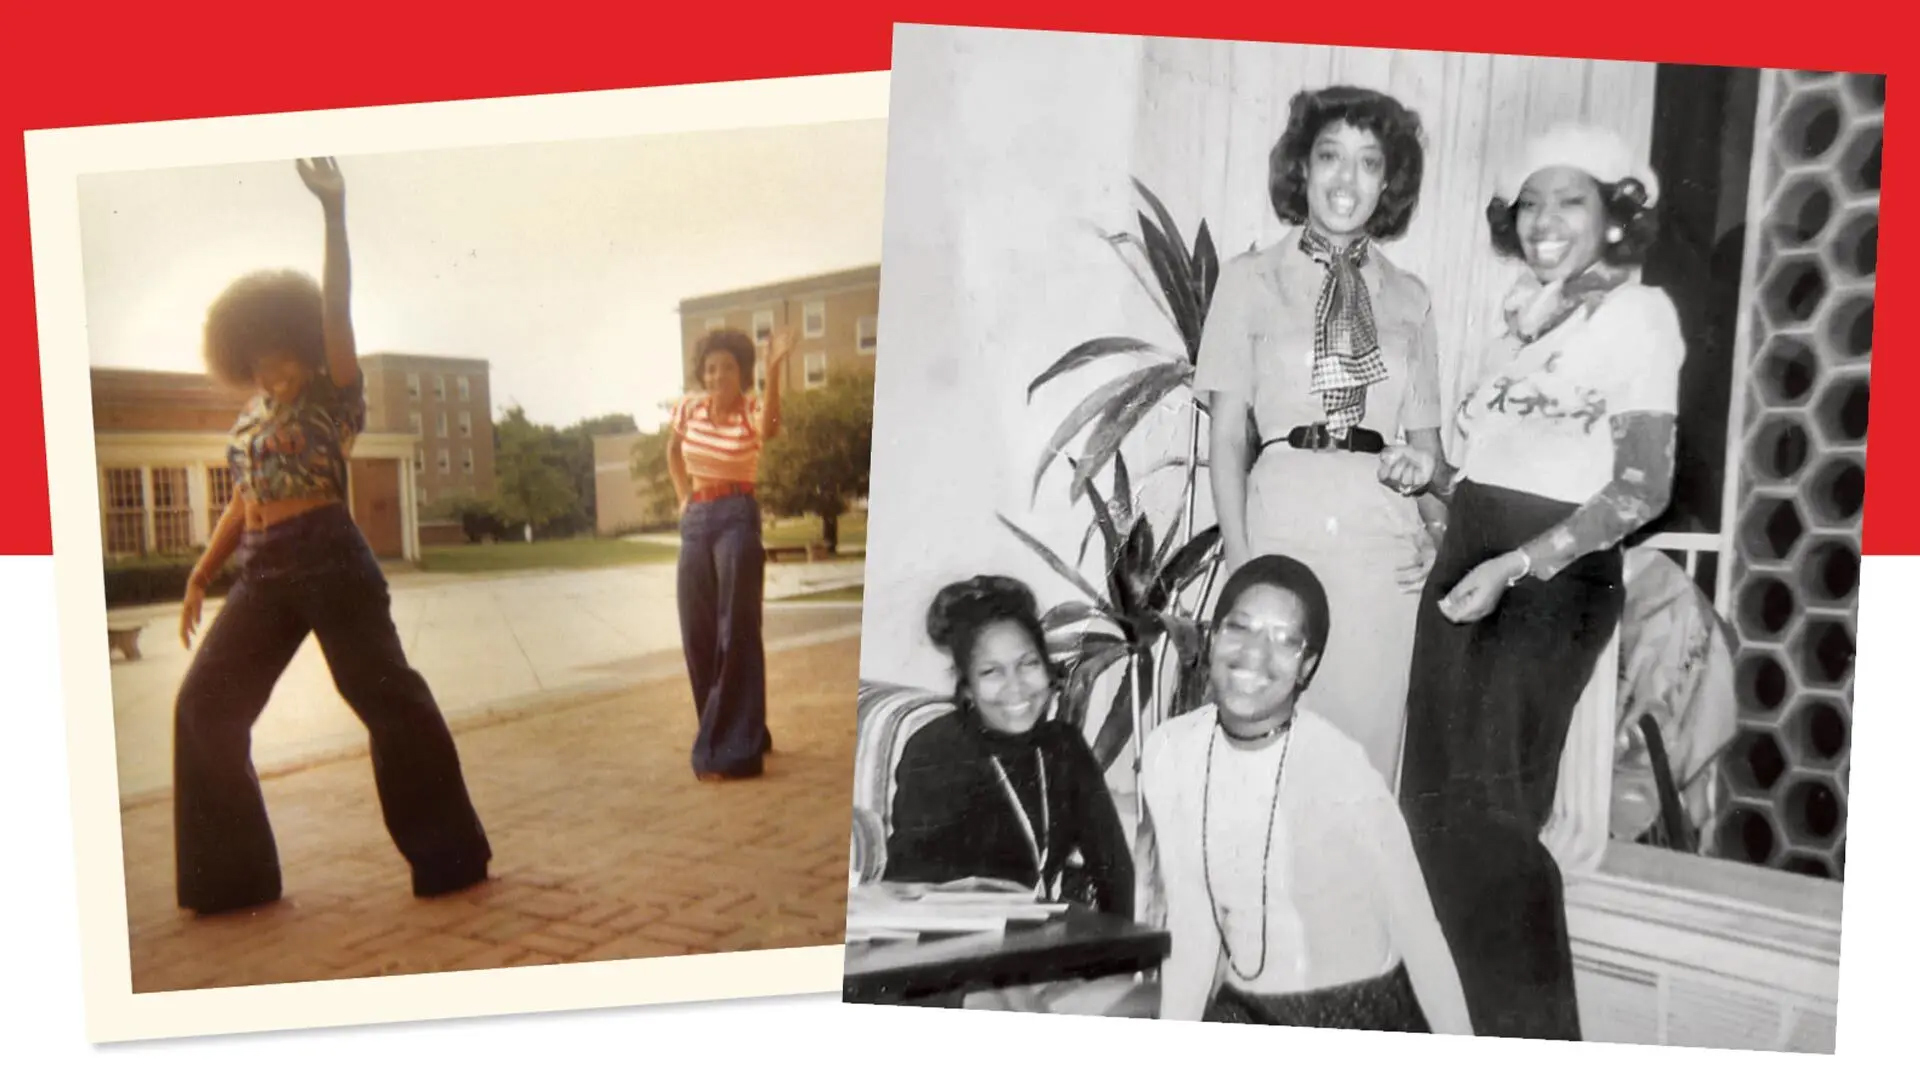 Joyce Dawkins and Everene Johnson-Turner (left) in the Cambridge Community in 1973; their first post-graduation reunion at D.C.’s The Flagship Restaurant in 1974. The Sugar Hill sisters, who first met as UMD students, will celebrate their 50th gathering this month. Photos courtesy of the Sugar Hill sisters.